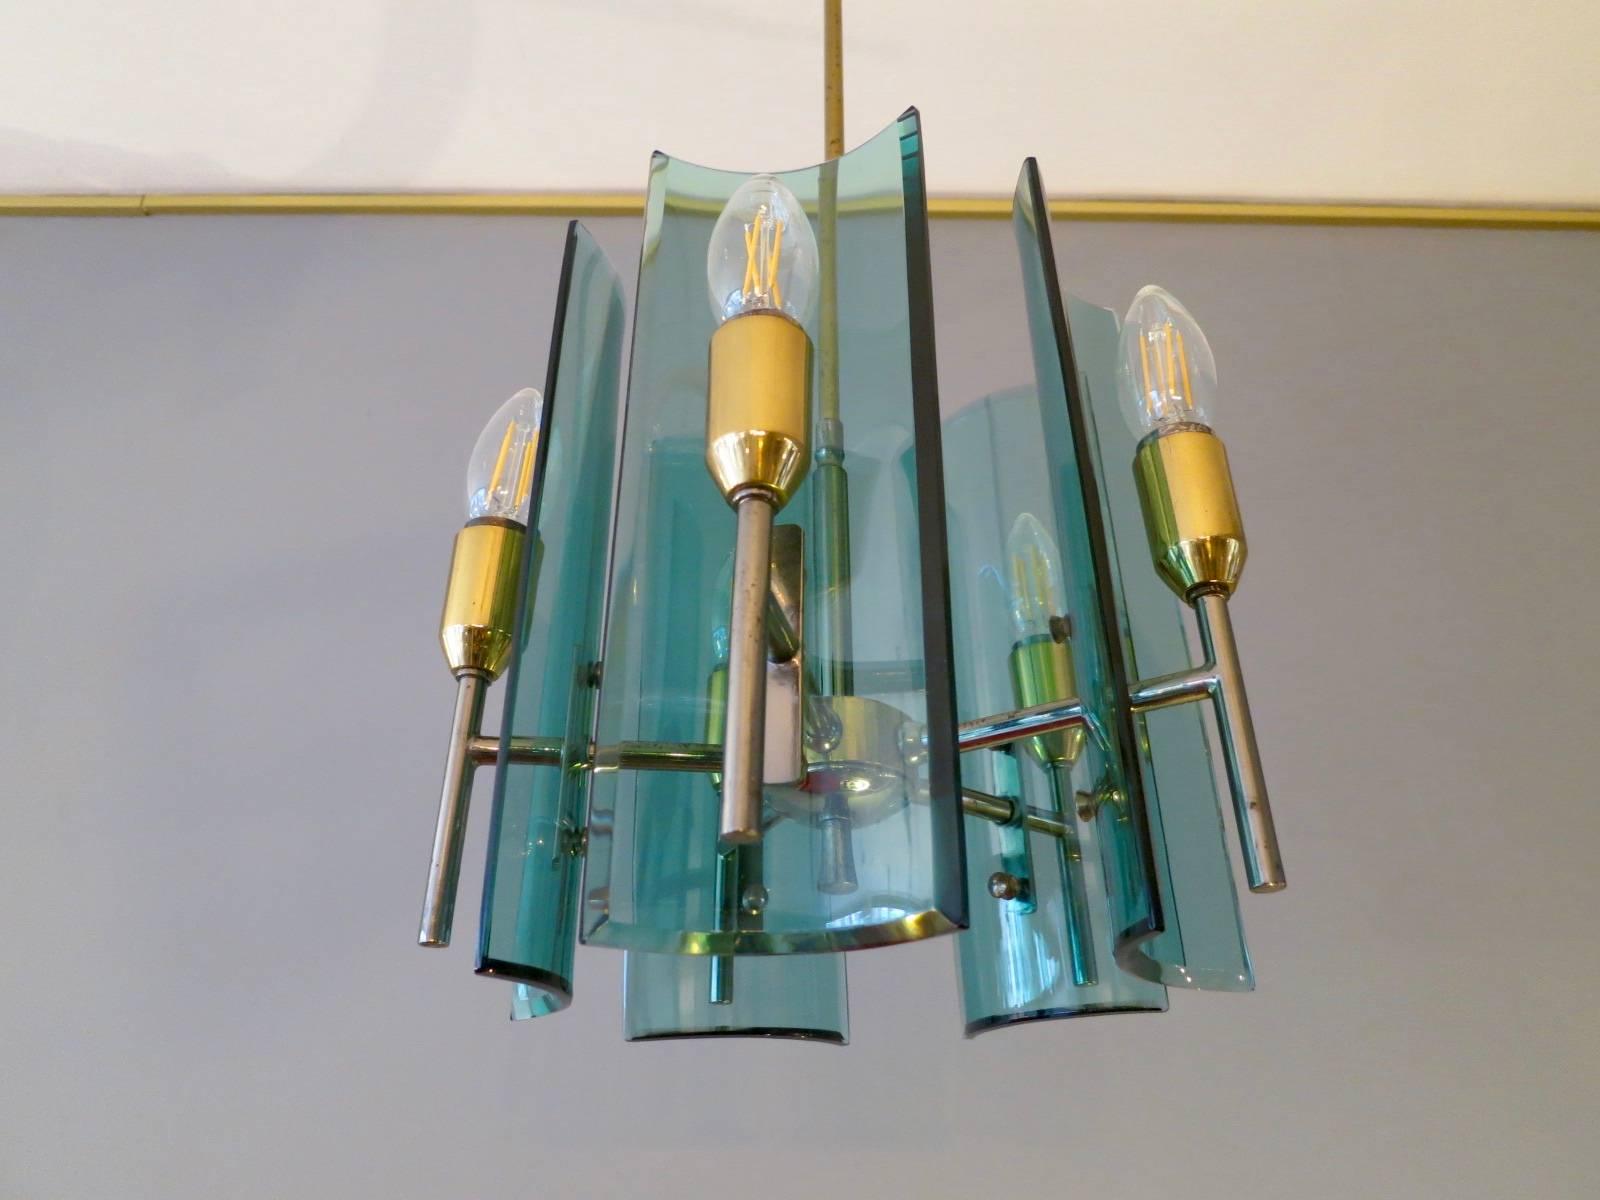 A very good quality five-arm pendant with thick green curved diffuser and nickel and brass frame and fittings. By G Paroldo Italy.